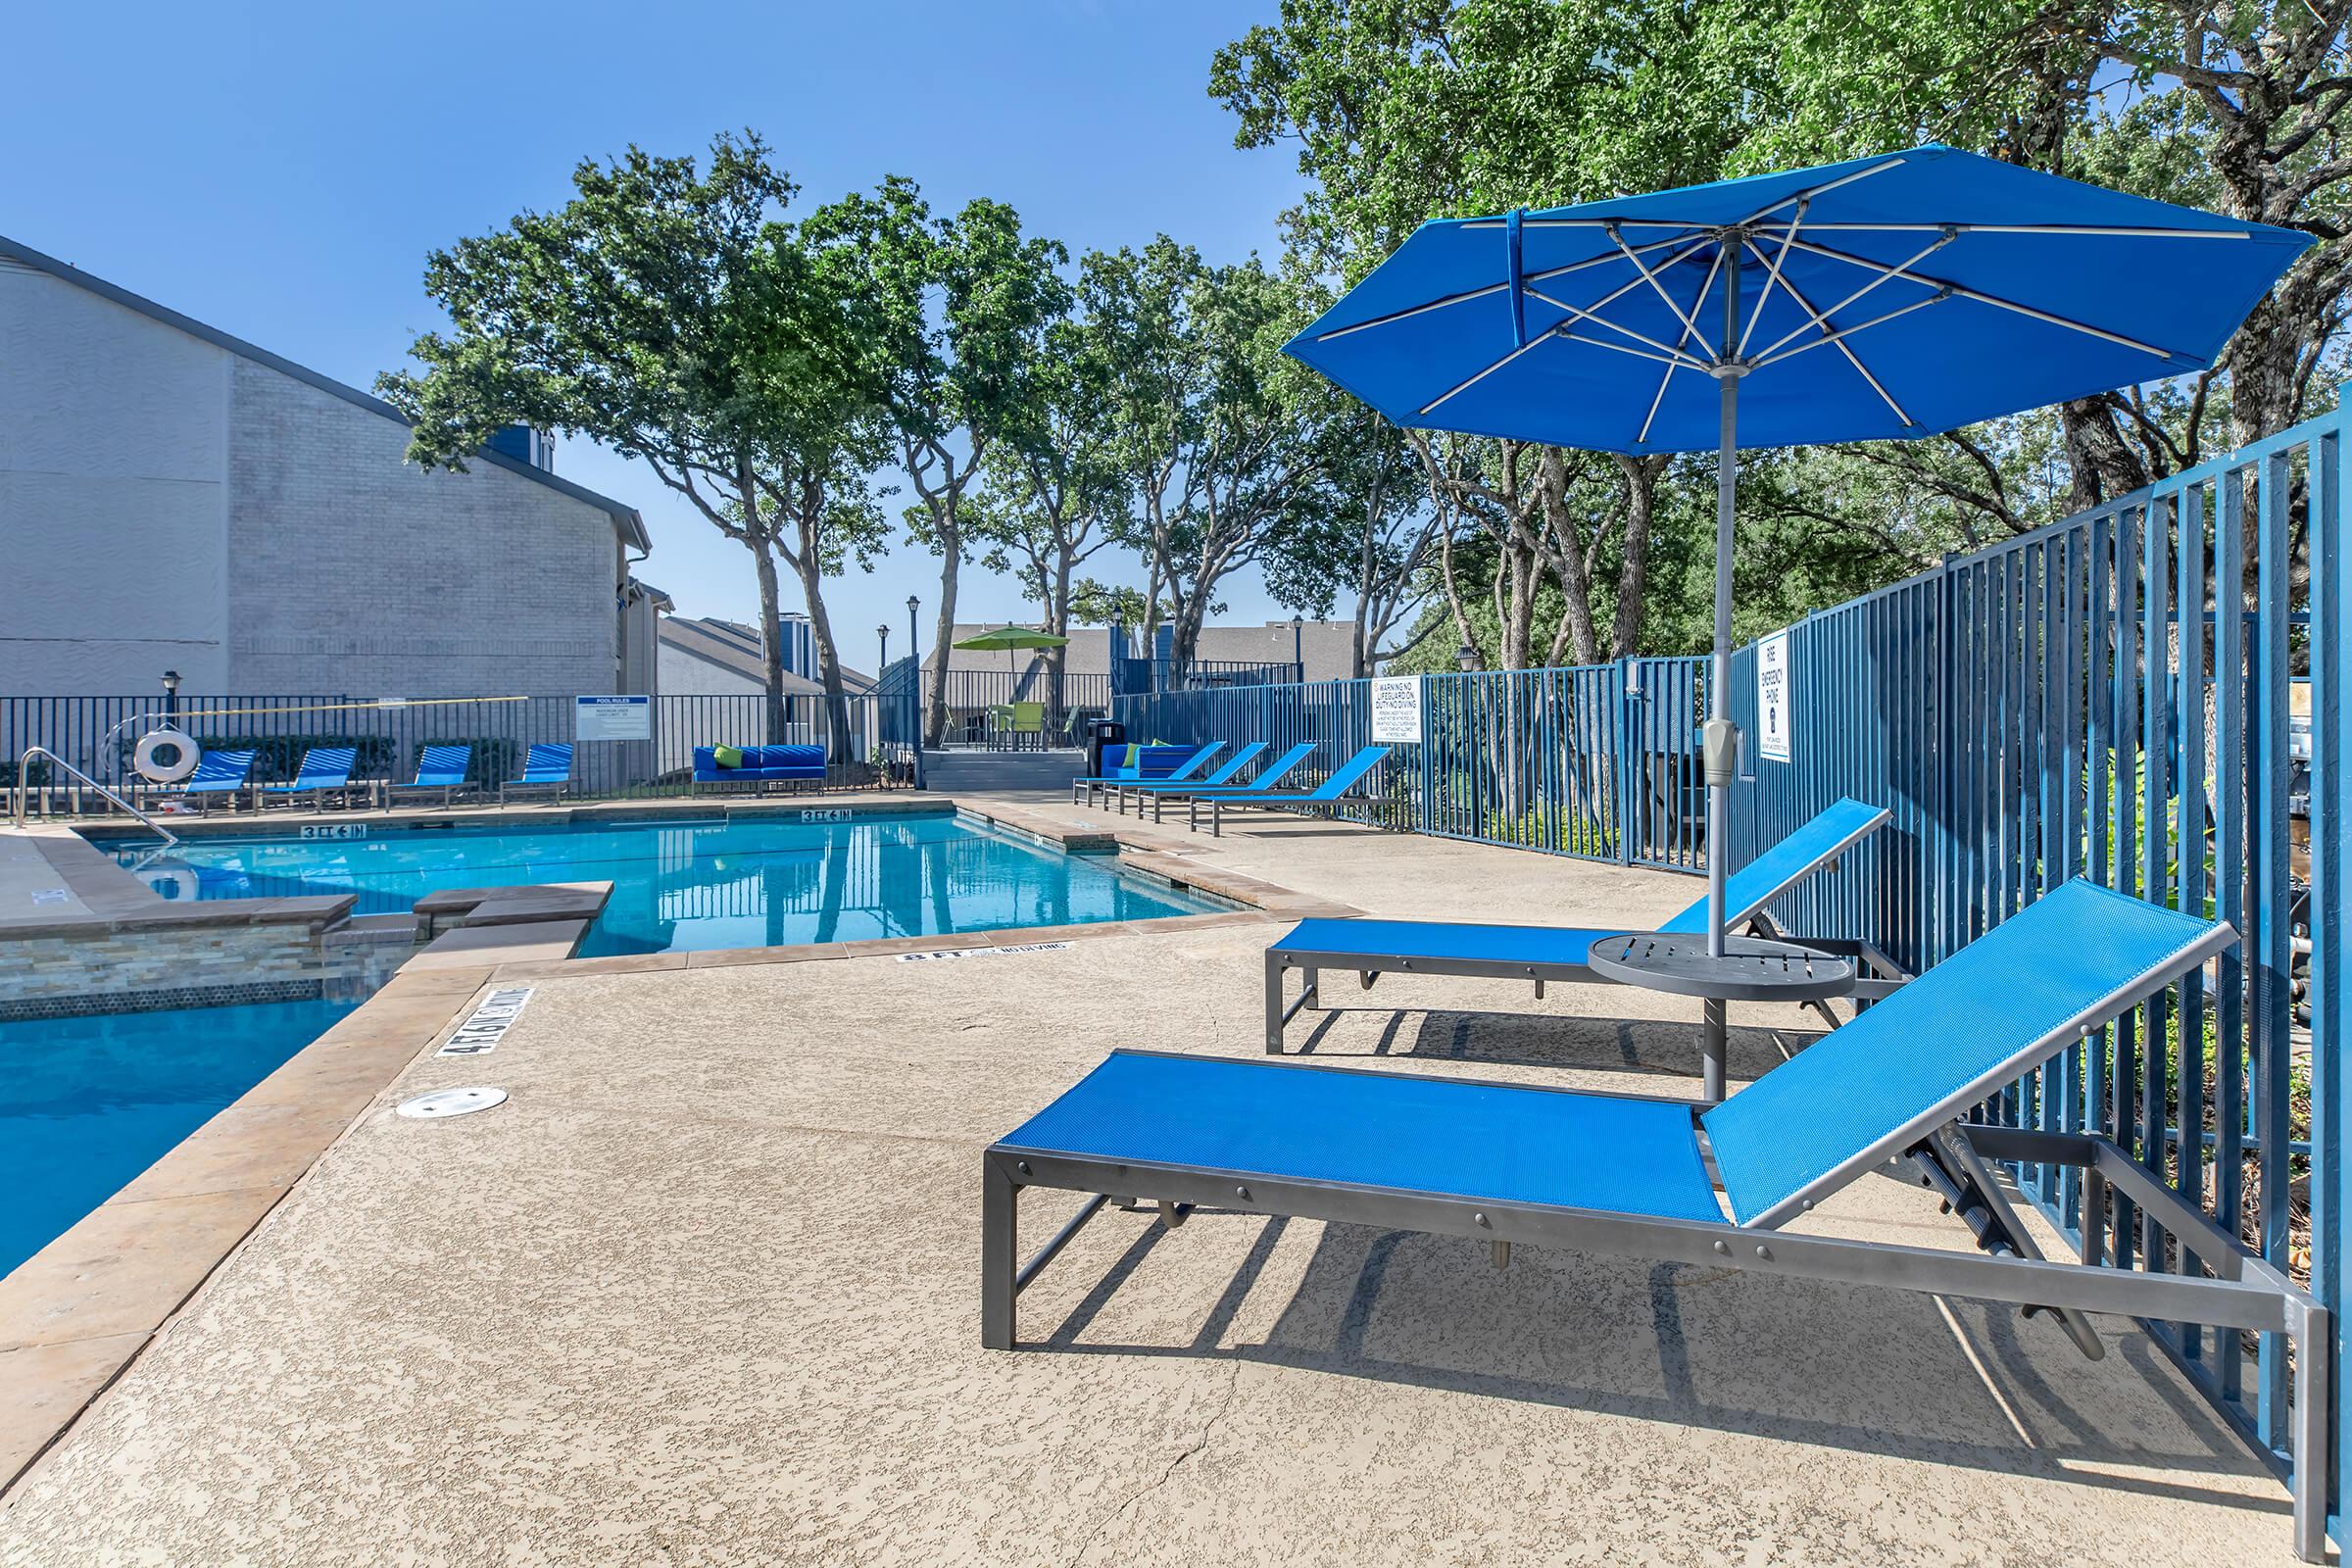 Blue umbrella and lounge chairs by the outdoor pool at Rise Bedford Lake